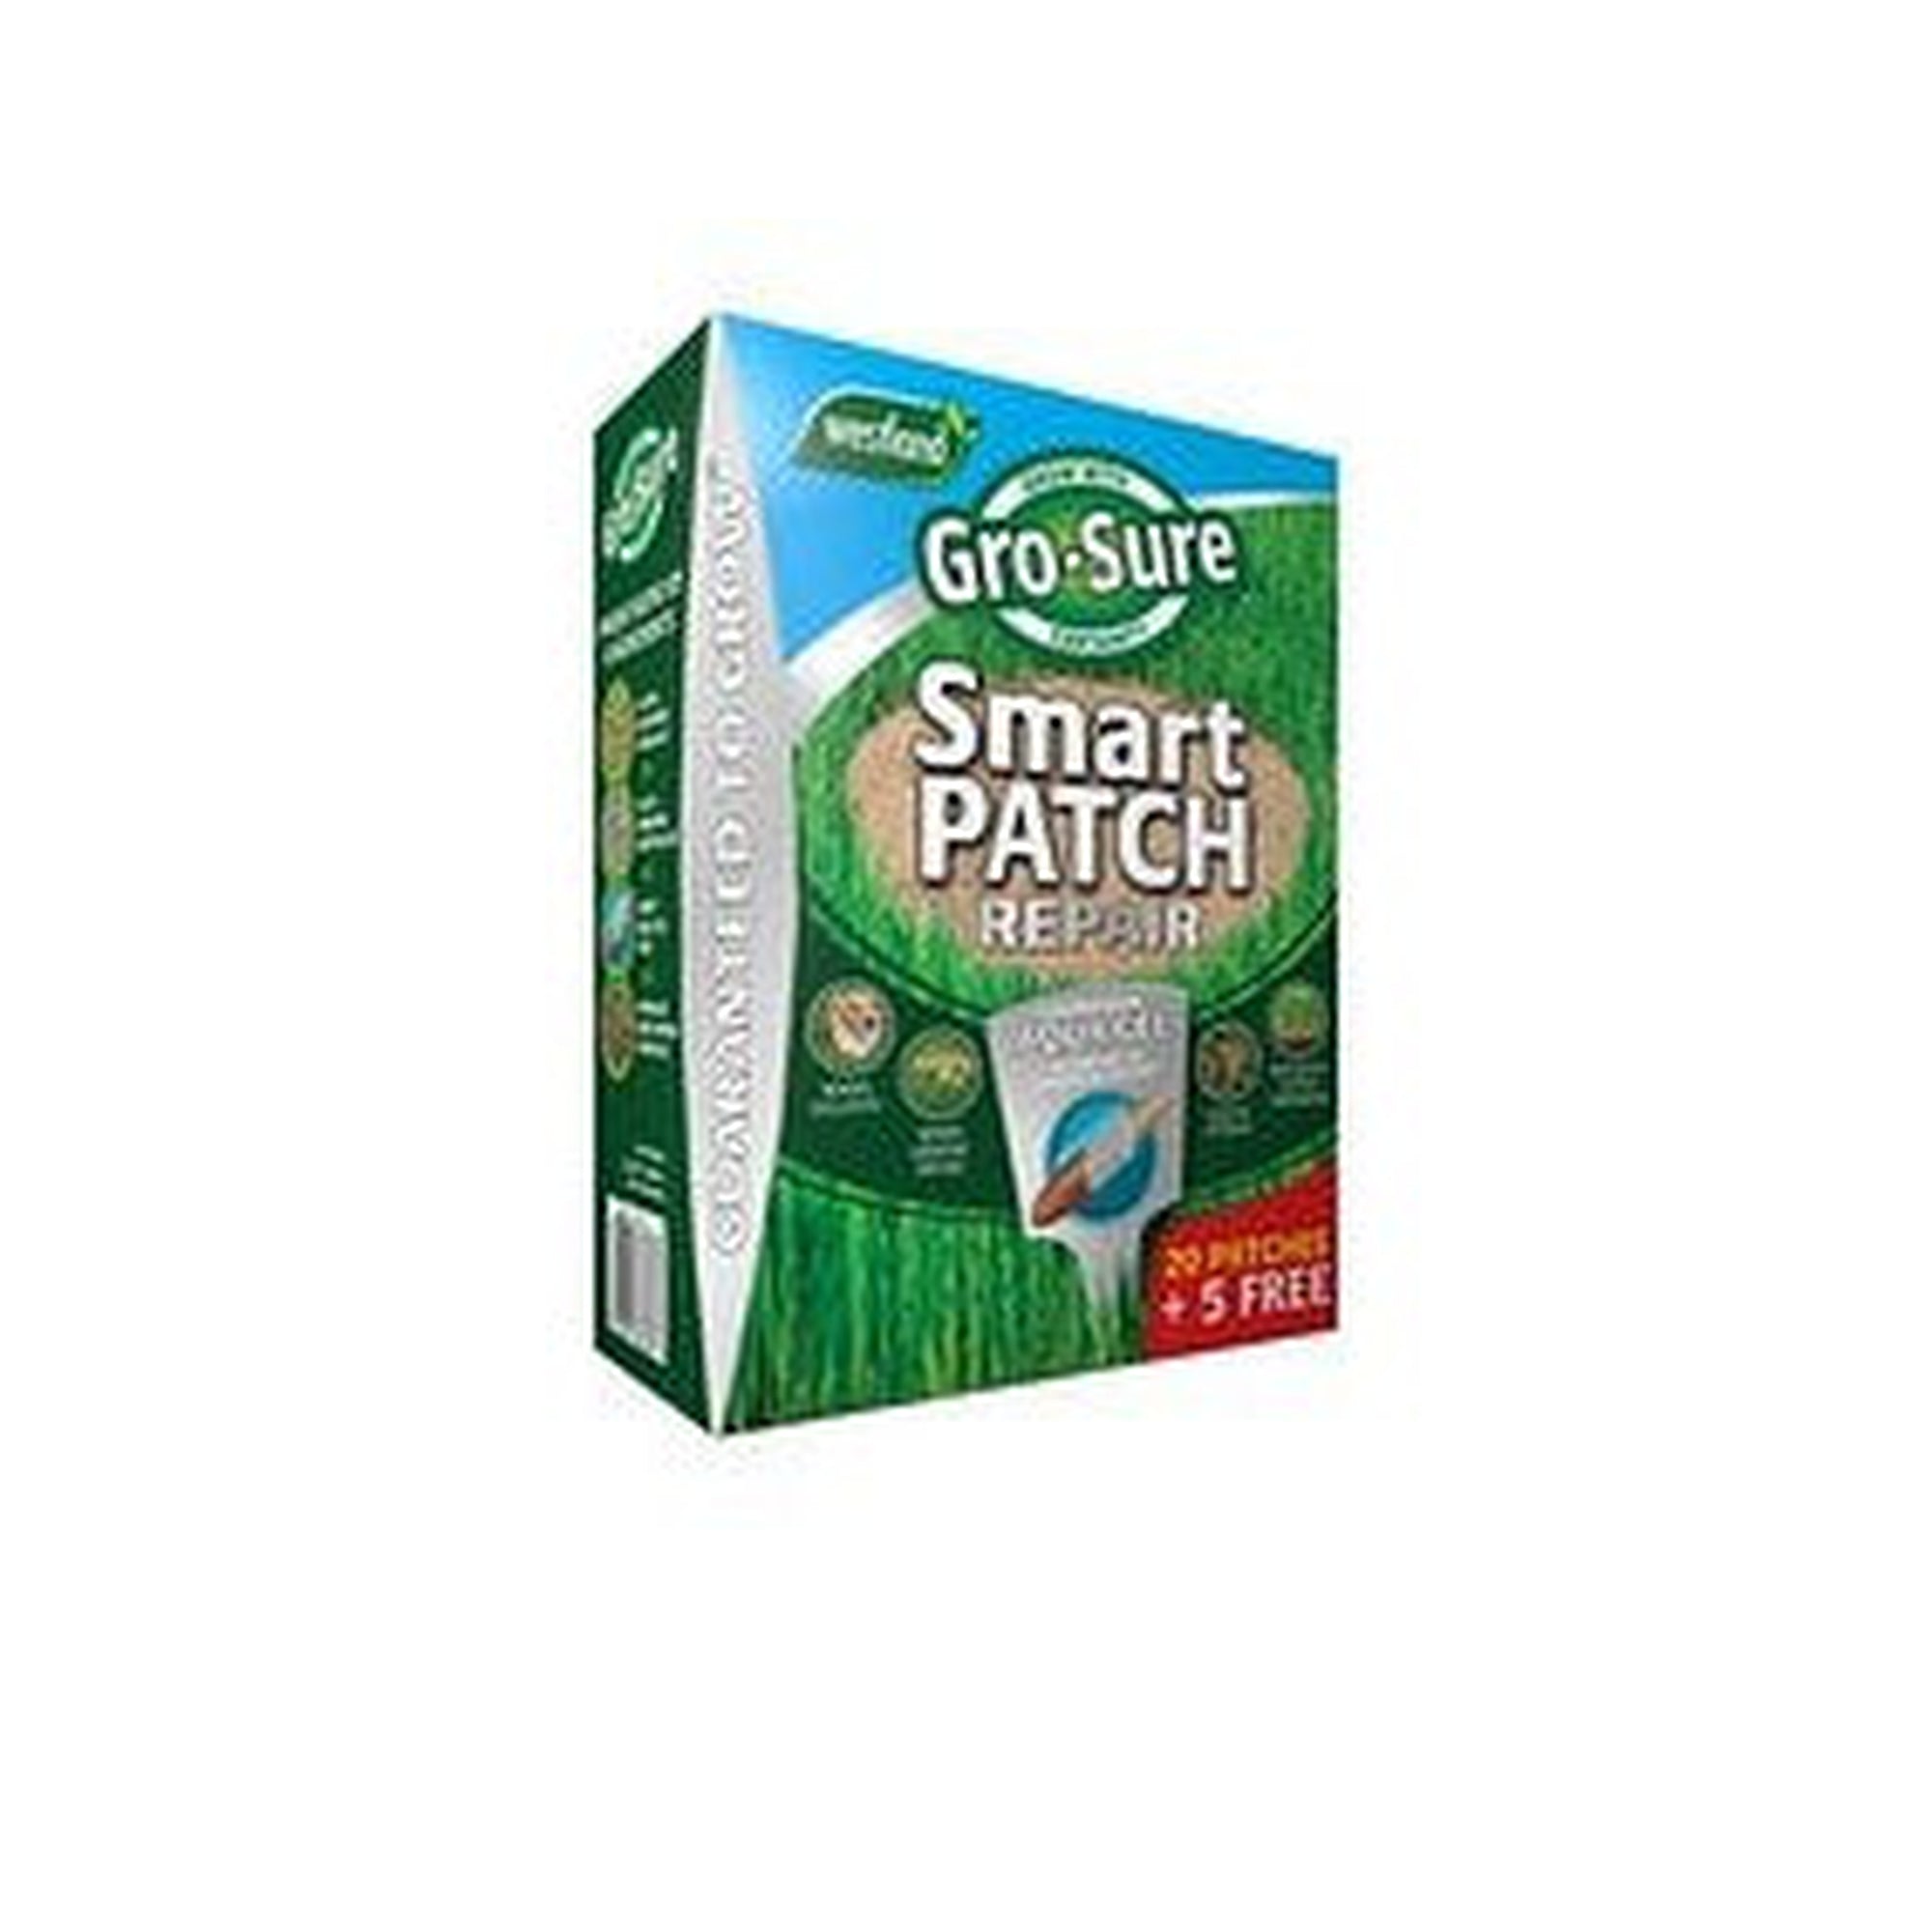 Gro-sure Smart Patch Repair Lawn Seed (20 Patches)